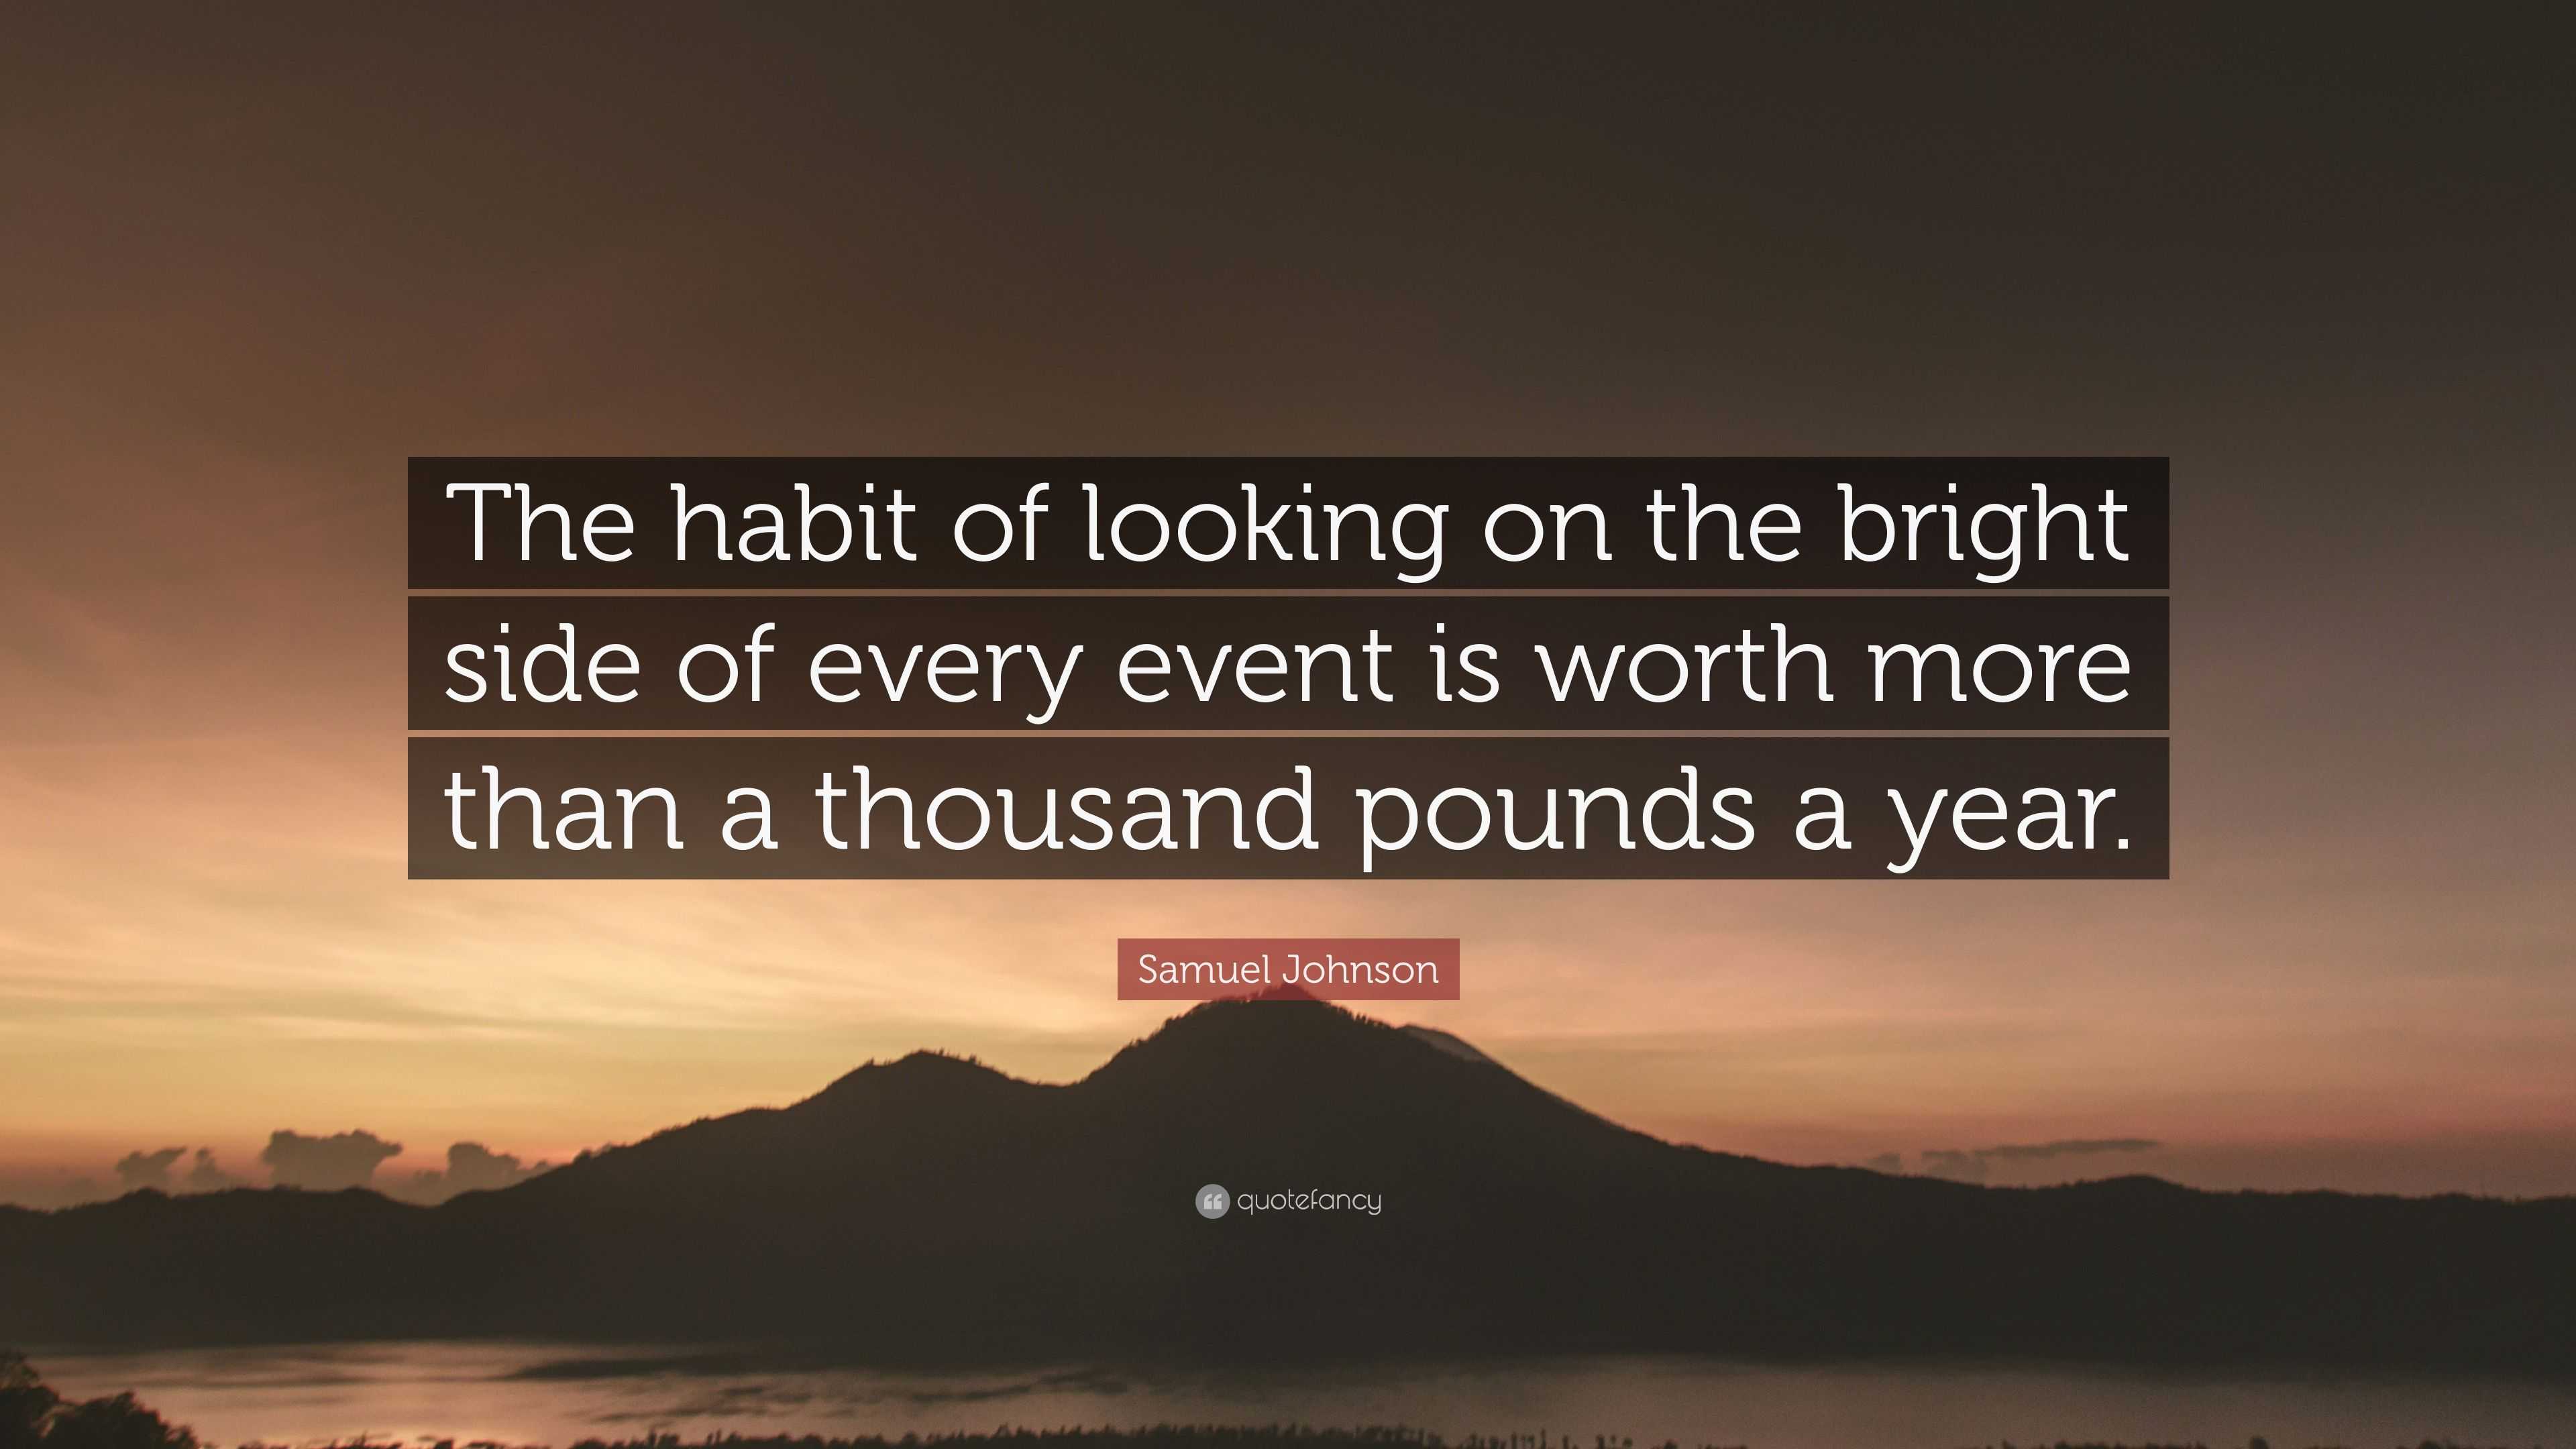 Samuel Johnson Quote: “The habit of looking on the bright side of every